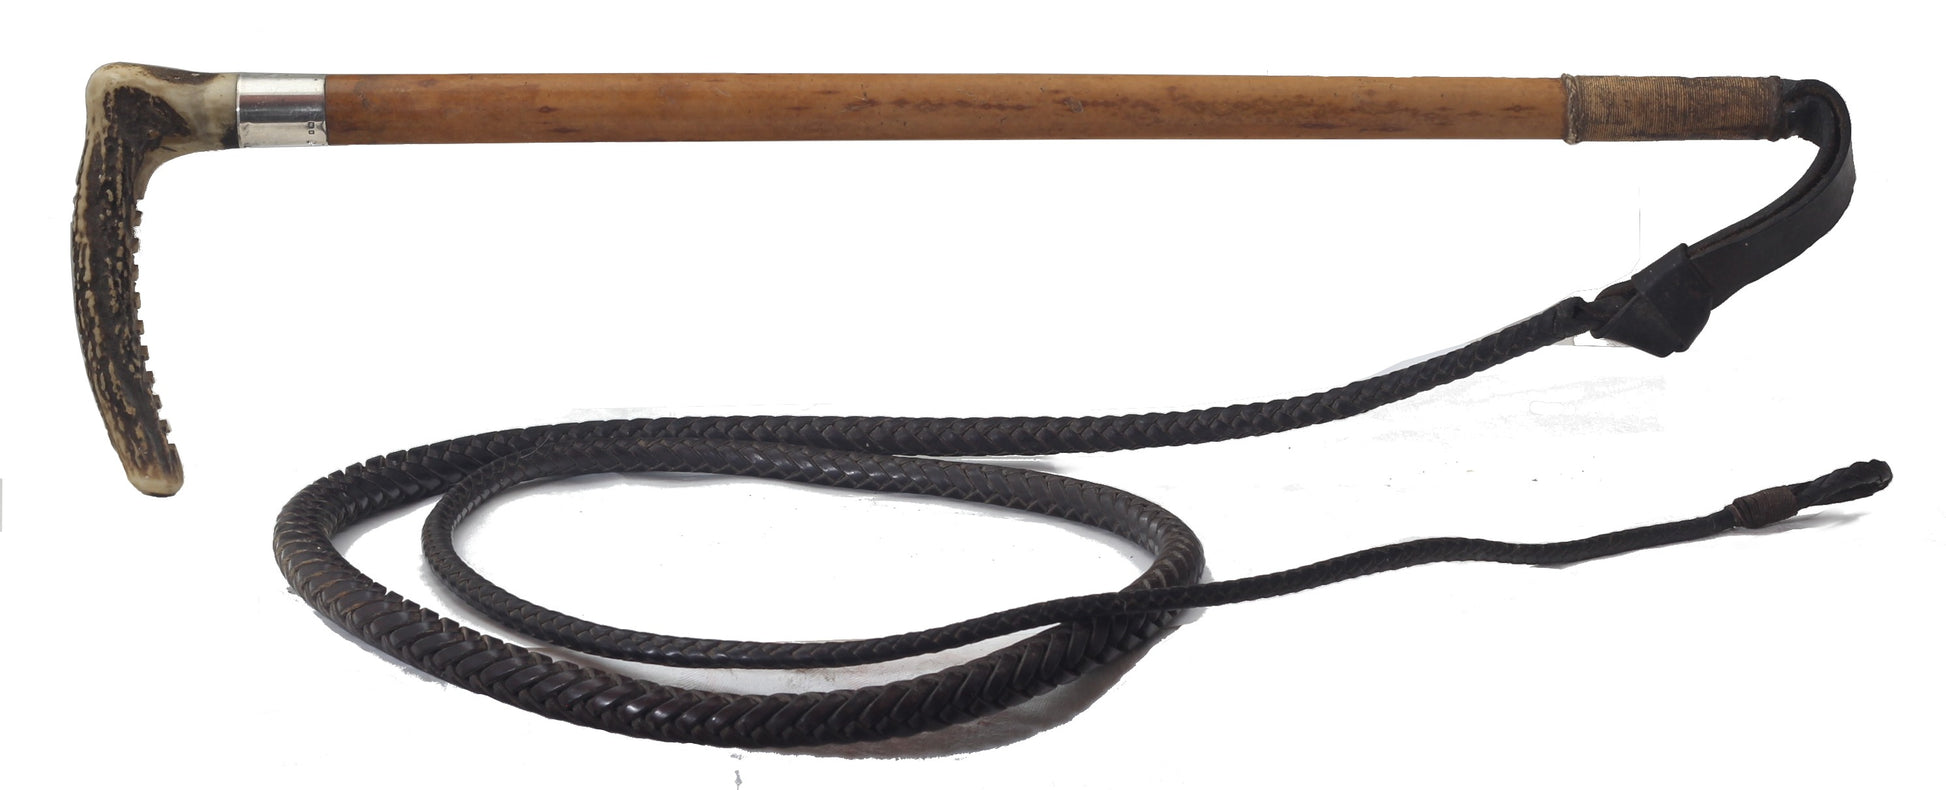 1933 Gents Malacca Hunting Whip by Jonathan Howell